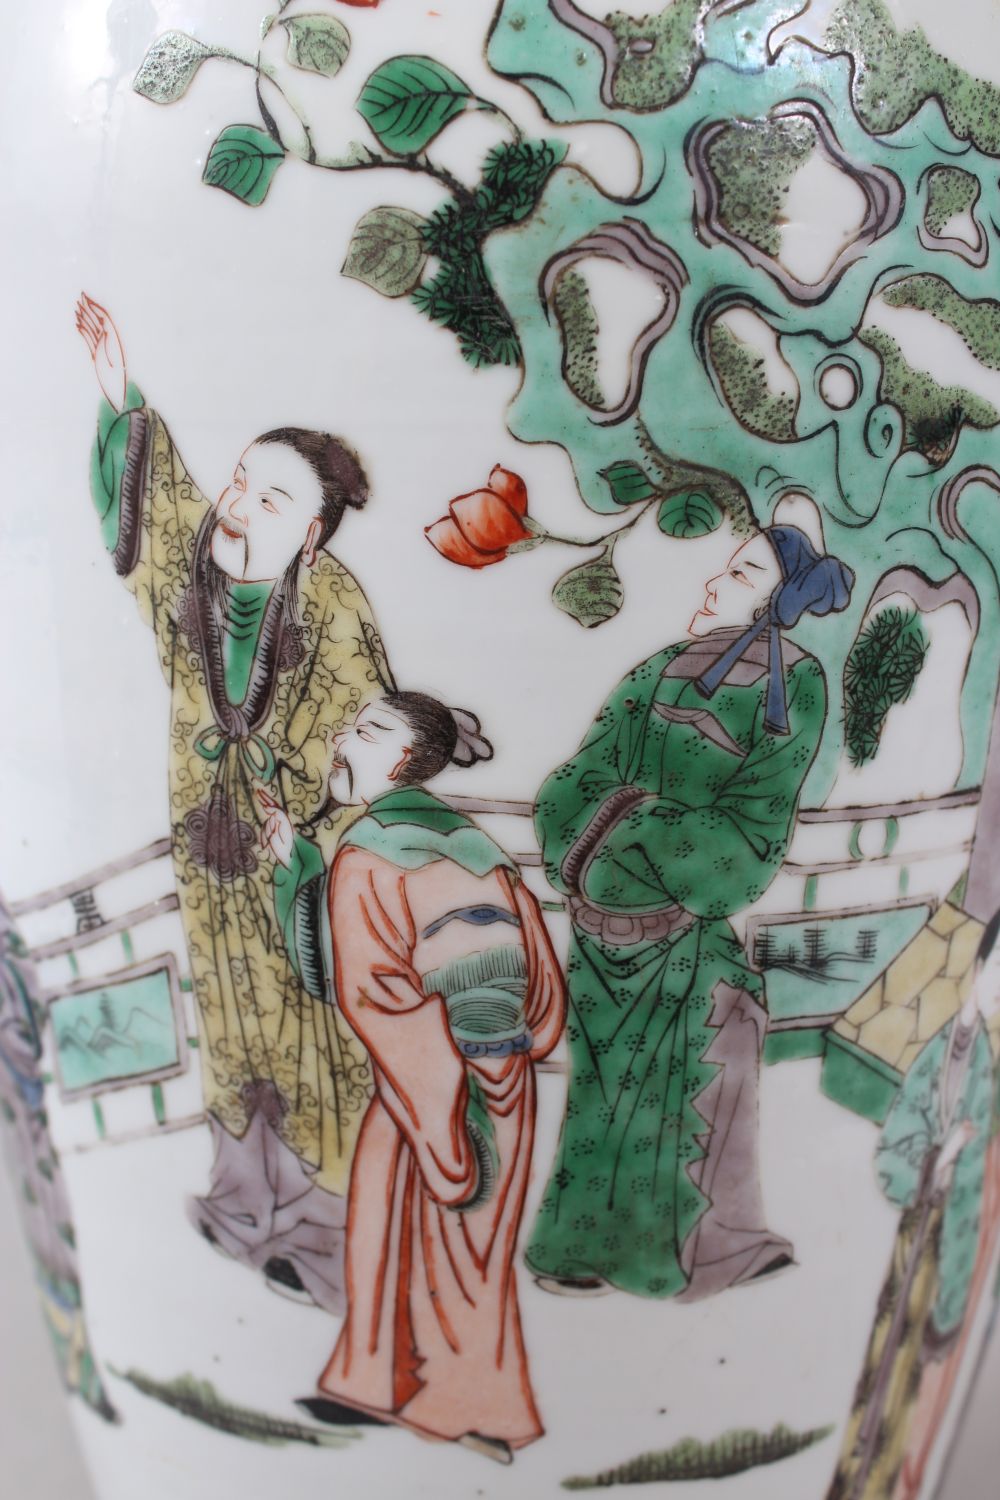 A LARGE CHINESE KANGXI PERIOD FAMILLE VERTE VASE Circa 1700, painted with various figures, trees - Image 6 of 10